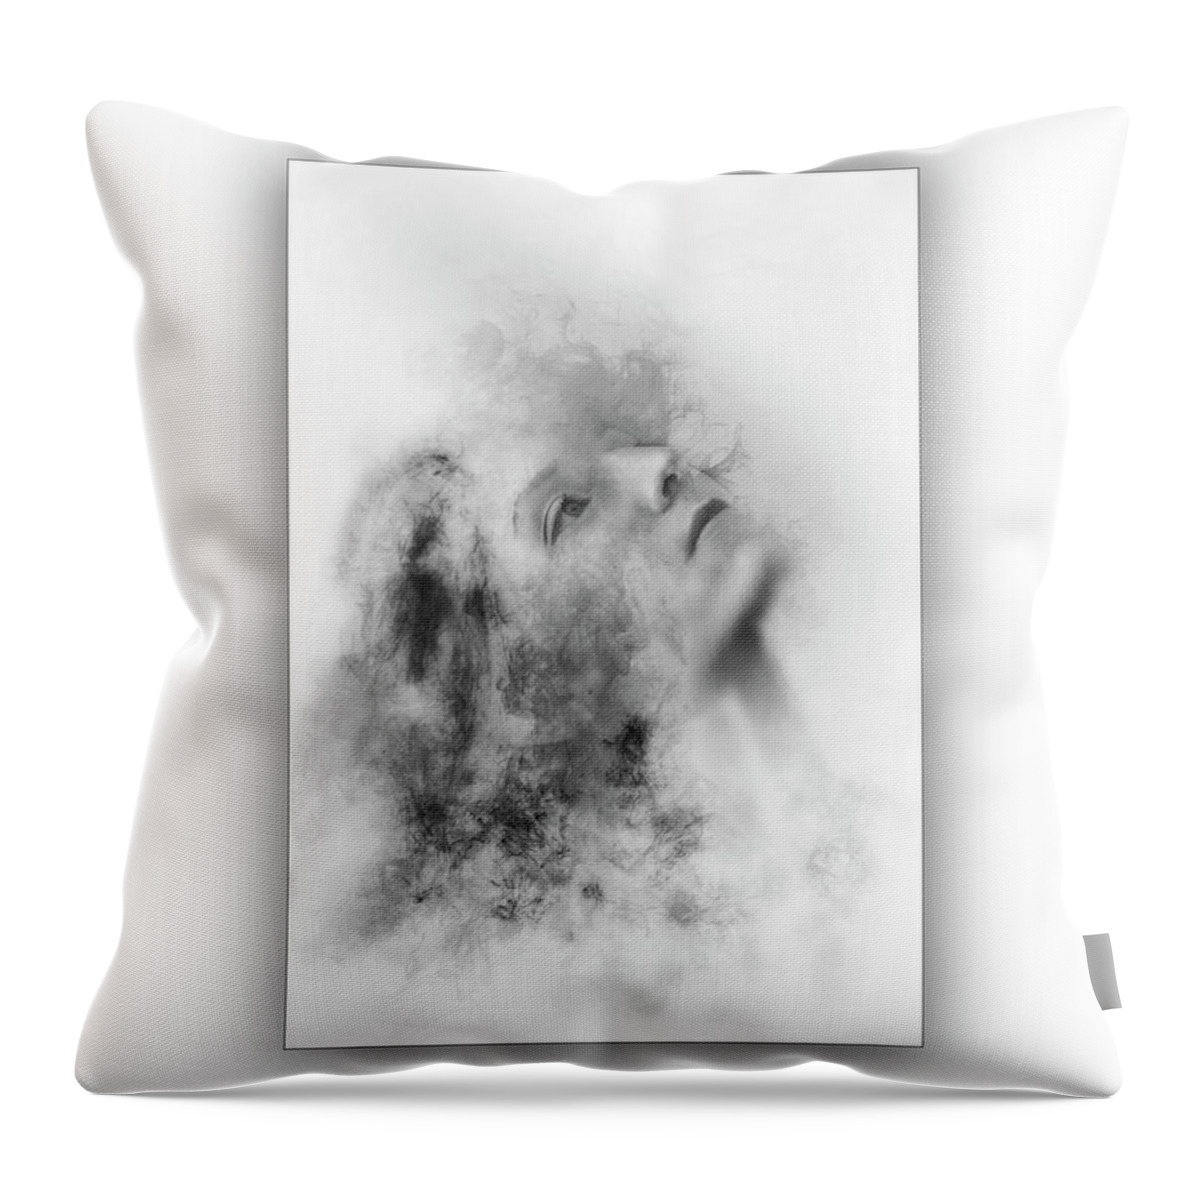 Smoke. Smoke Photo Throw Pillow featuring the photograph Up In Smoke by Endre Balogh